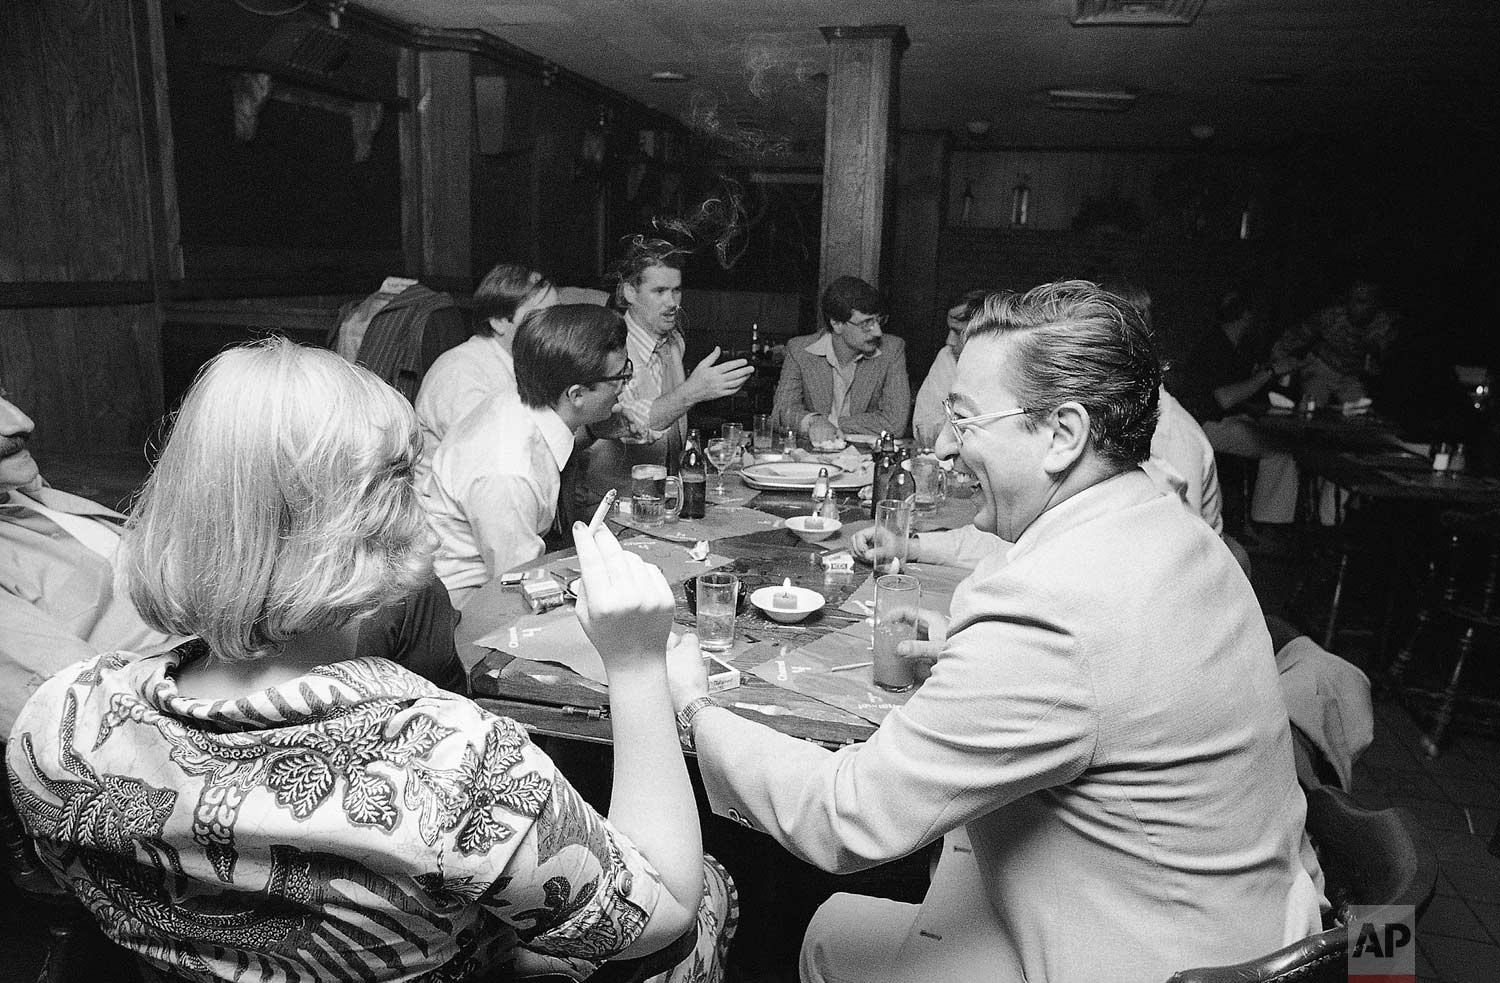  People in a midtown Manhattan bar keep drinking by candlelight in New York on Wednesday, July 13, 1977 after the city was struck by a power failure. (AP Photo/Steve Oualline) 